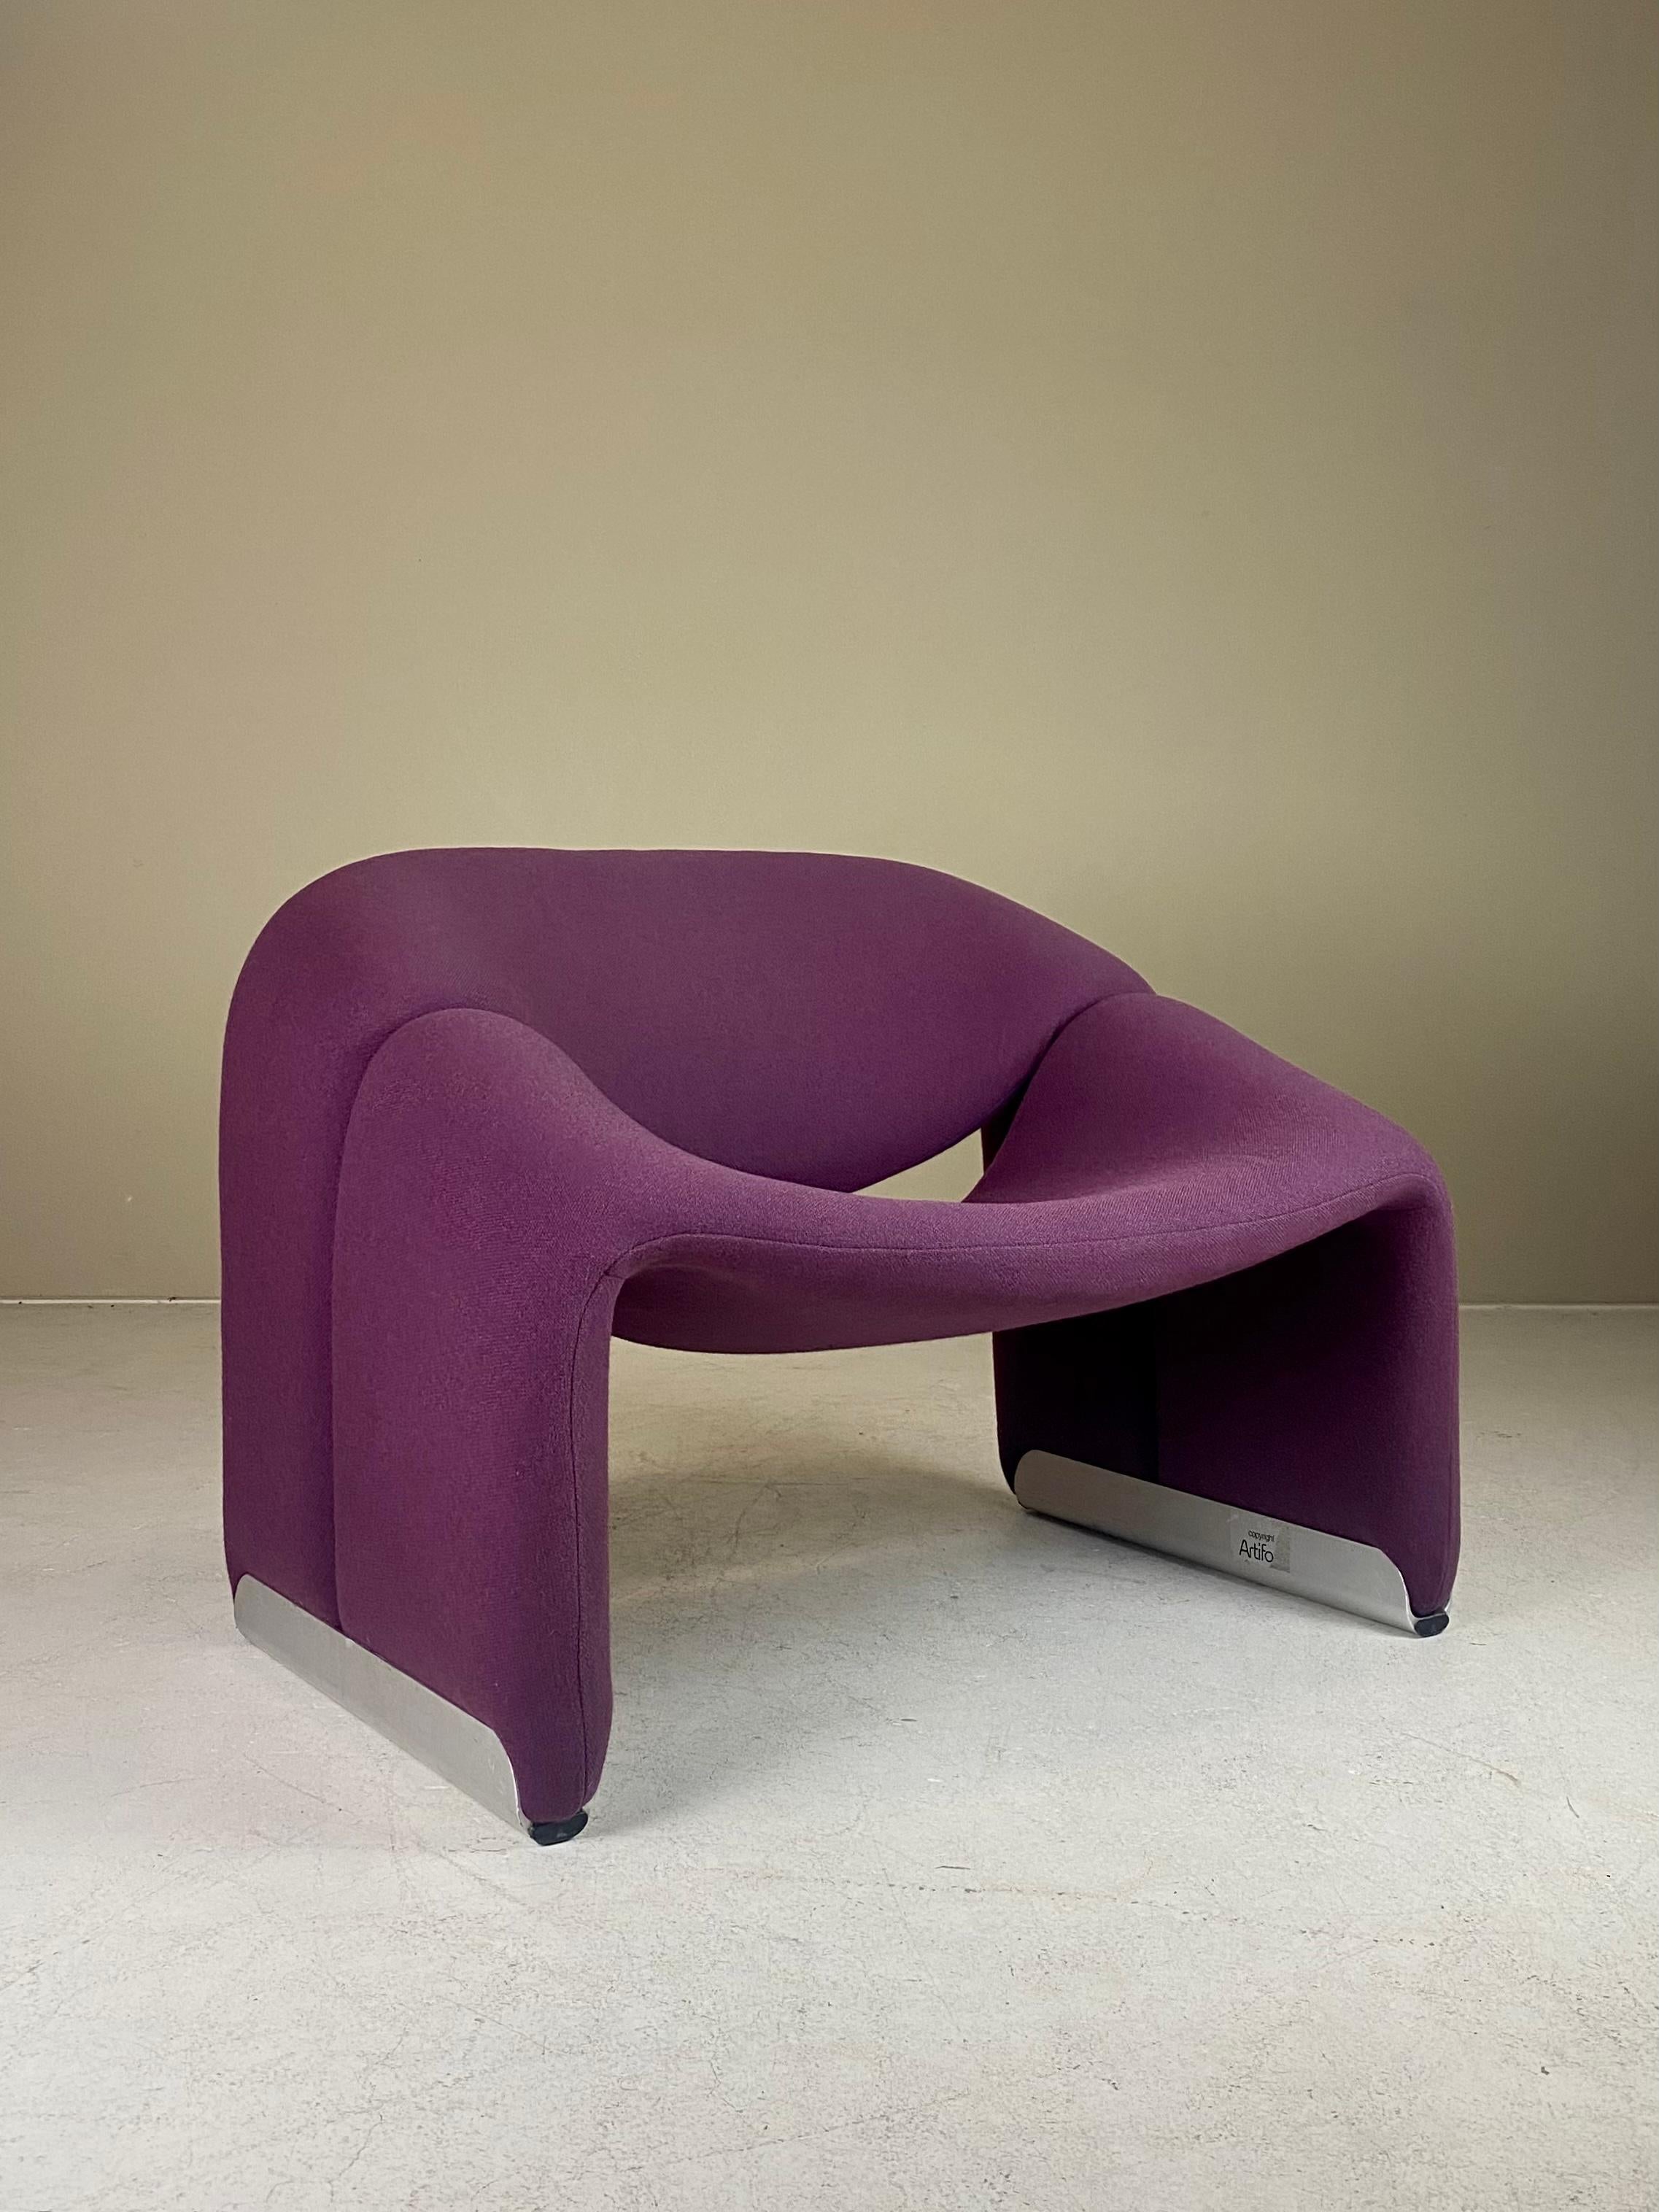 Born in Paris in 1927, Pierre Paulin a created his best known pieces in cooperation with the Dutch manufacturer Artifort. The Tongue chair, the Ribbon chair, the Tulip — to name but a few — all feature in museums such as the MOMA New York and Centre